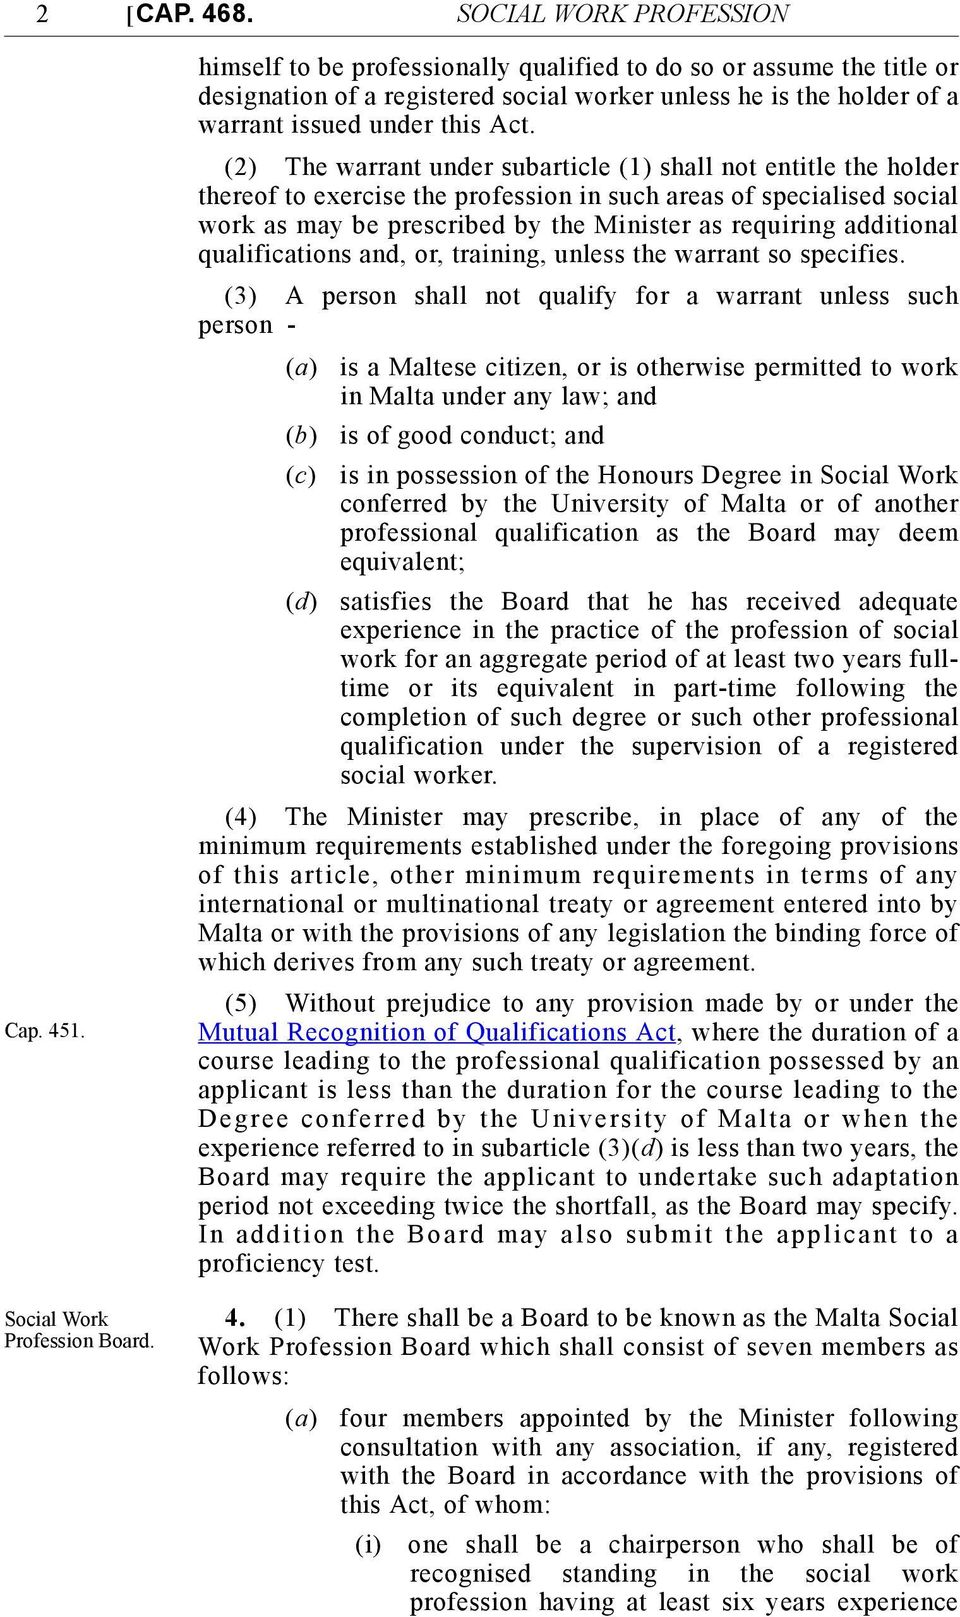 (2) The warrant under subarticle (1) shall not entitle the holder thereof to exercise the profession in such areas of specialised social work as may be prescribed by the Minister as requiring